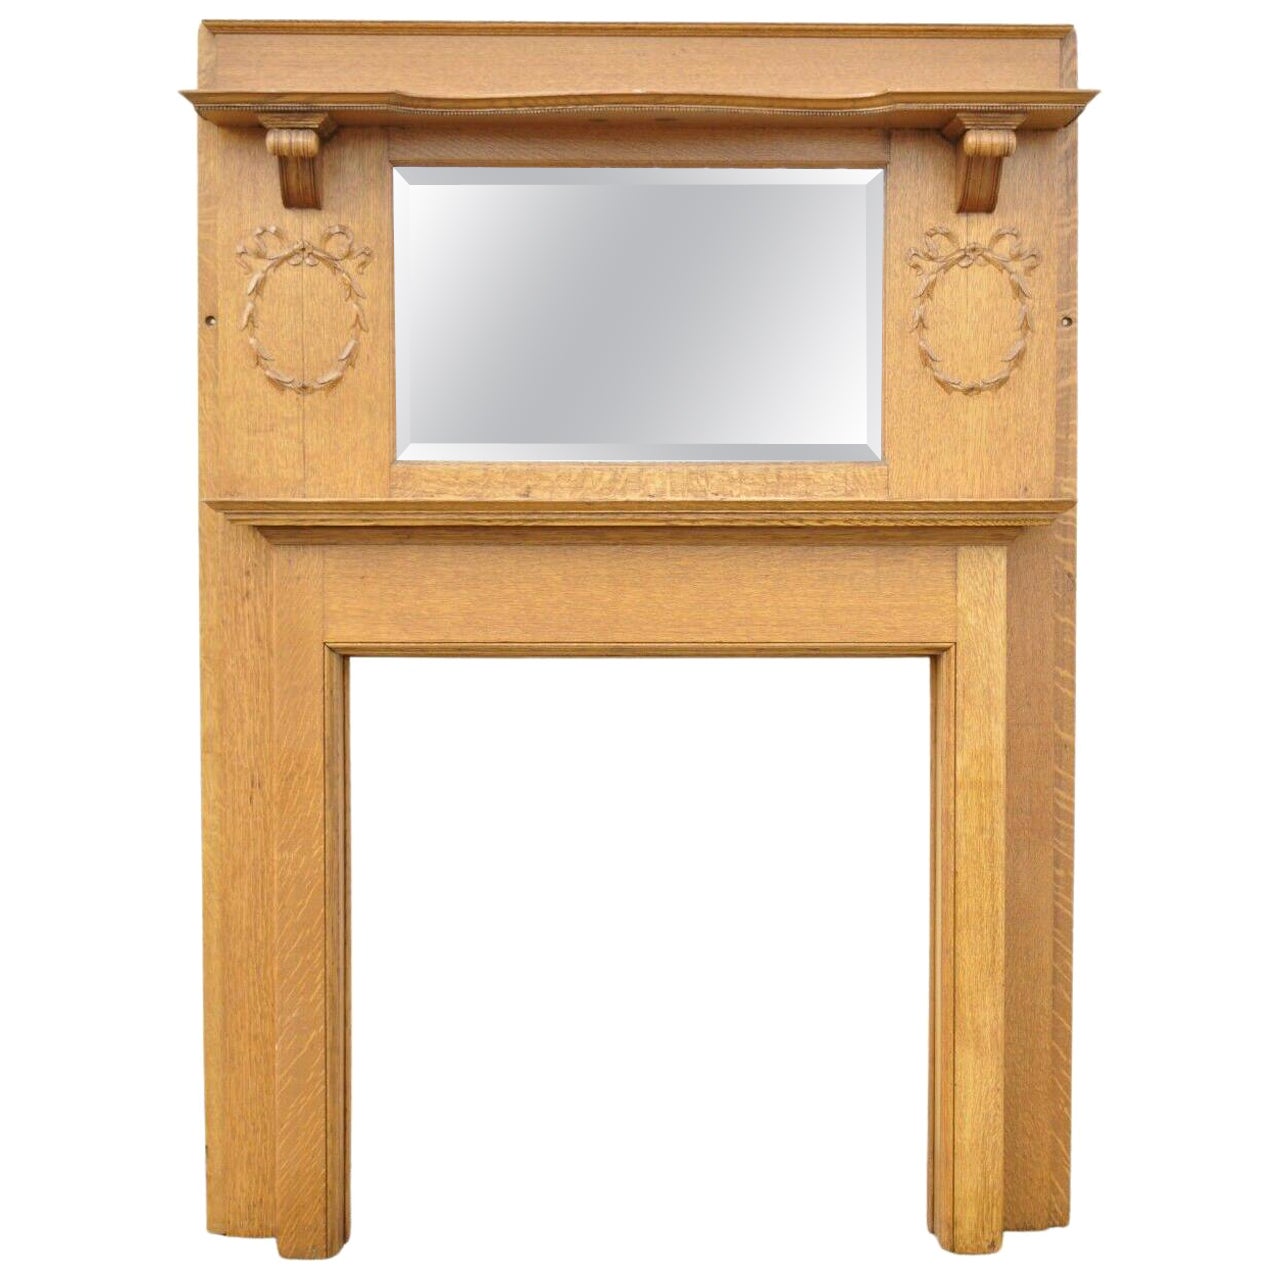 Antique American Victorian Golden Oak Wood Fireplace Mantel with Beveled Mirror For Sale